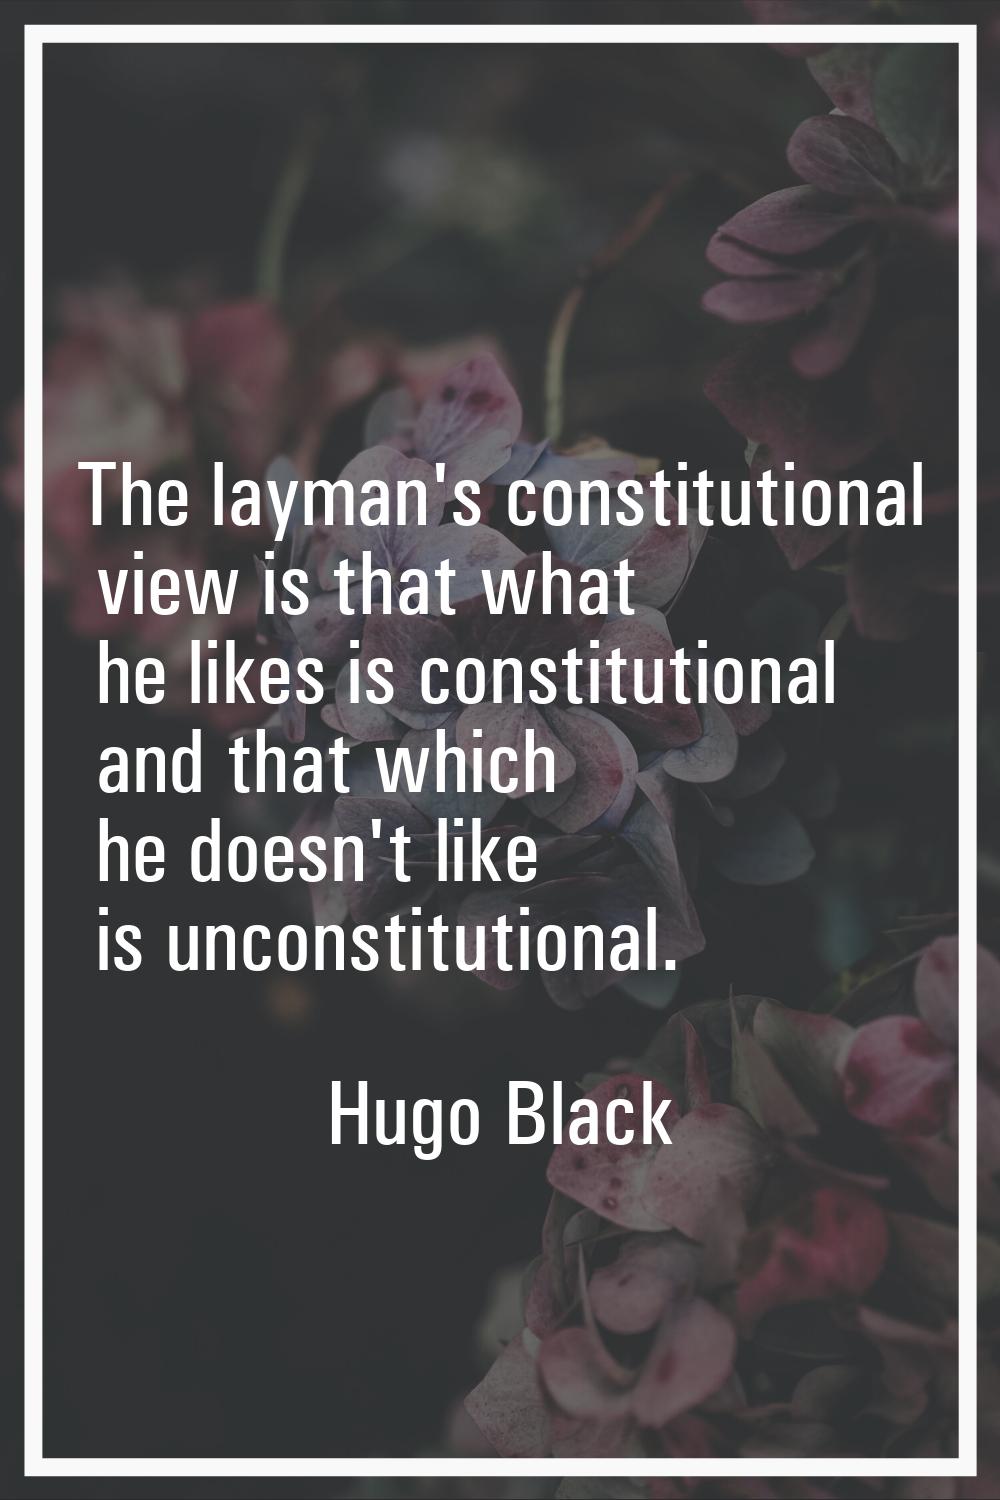 The layman's constitutional view is that what he likes is constitutional and that which he doesn't 